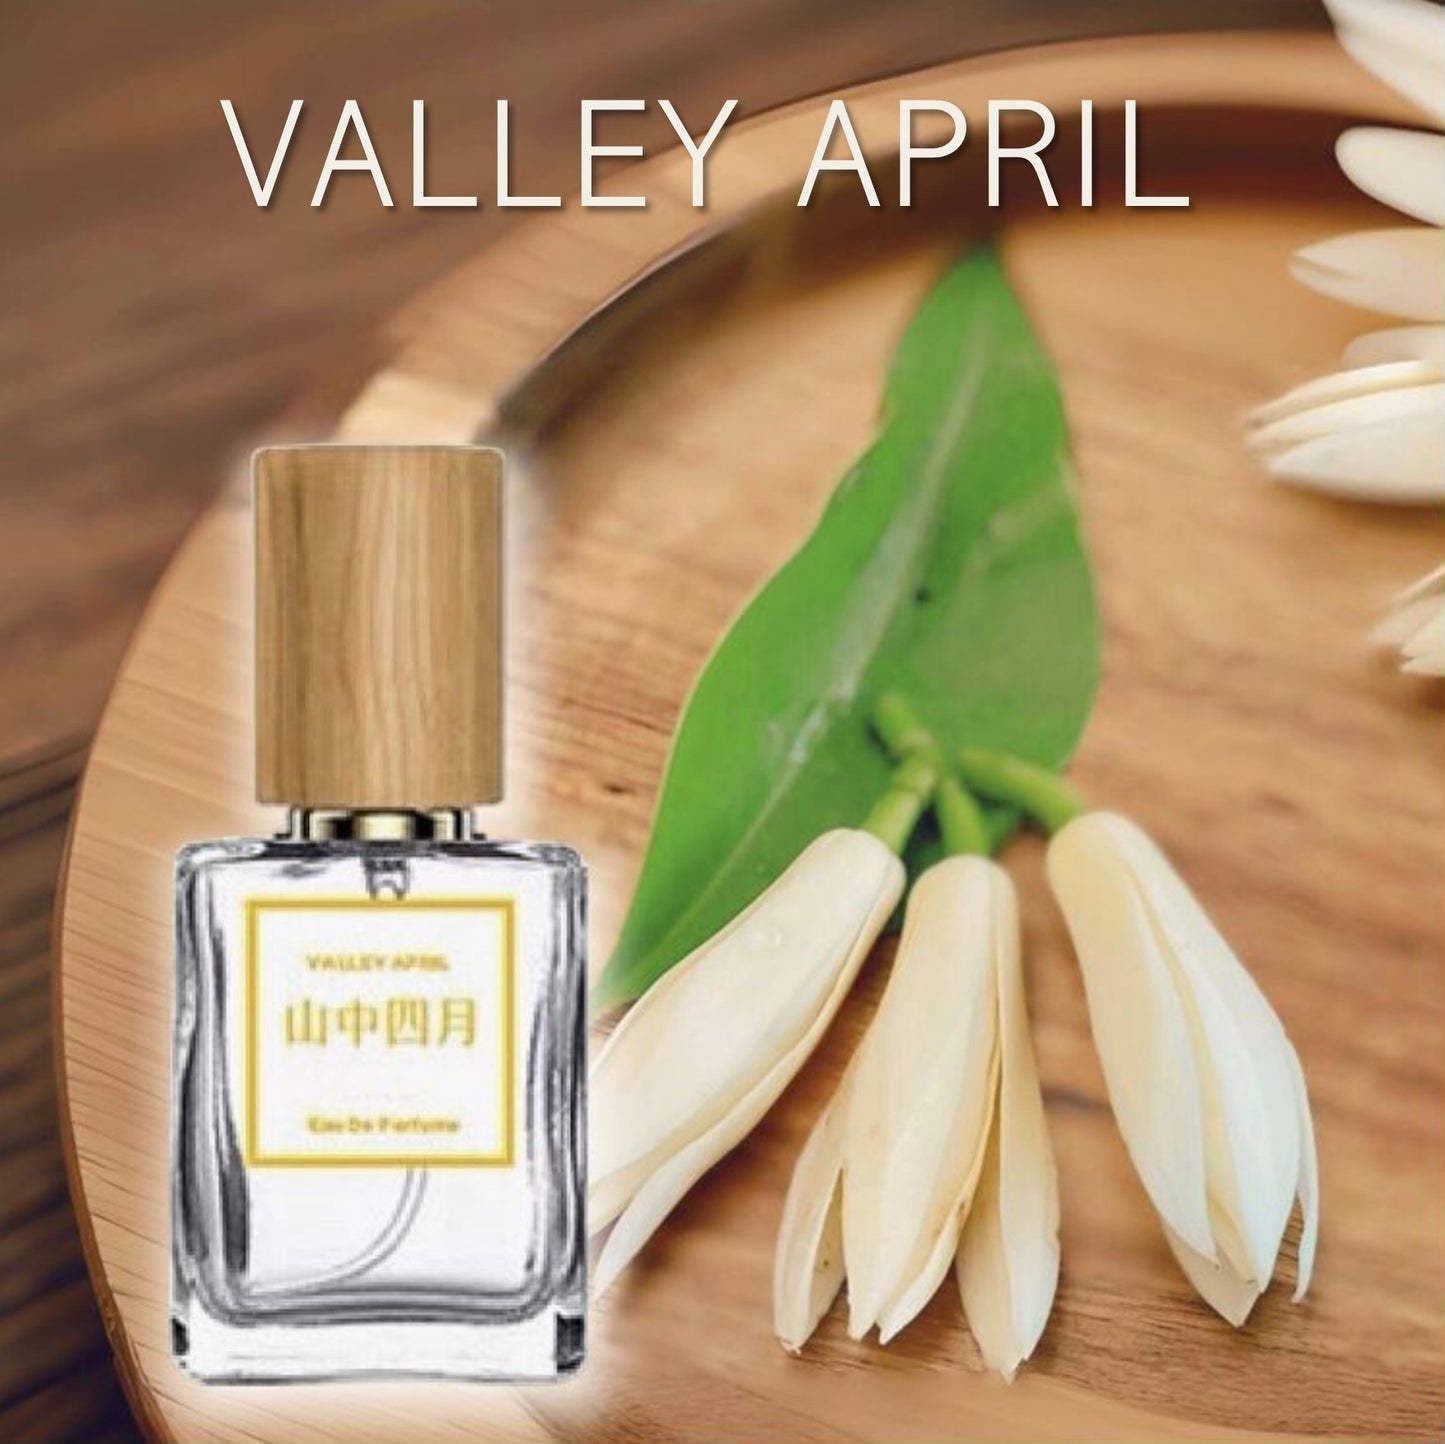 Orient White Orchid Perfume for the girl you have secretly loved for a long time-50ML